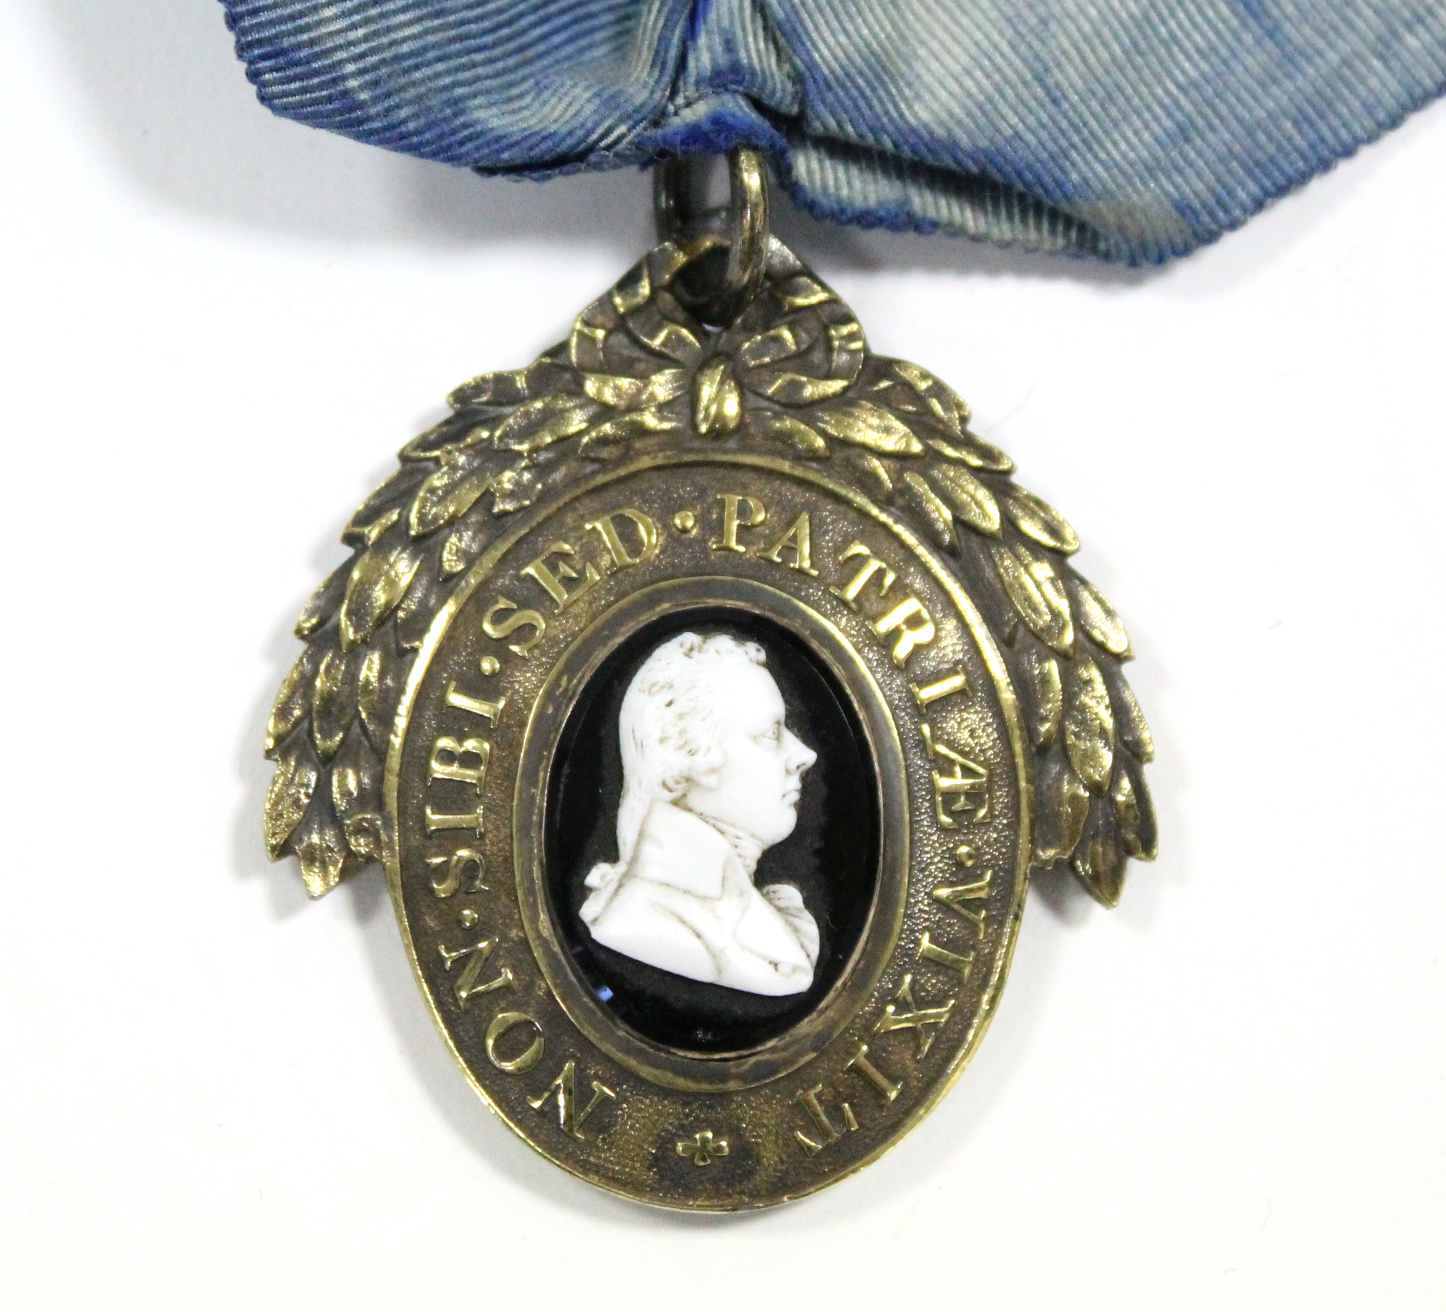 A 19th century London Pitt Club member’s badge, the silver-gilt oval medal inset “Tassie” glass